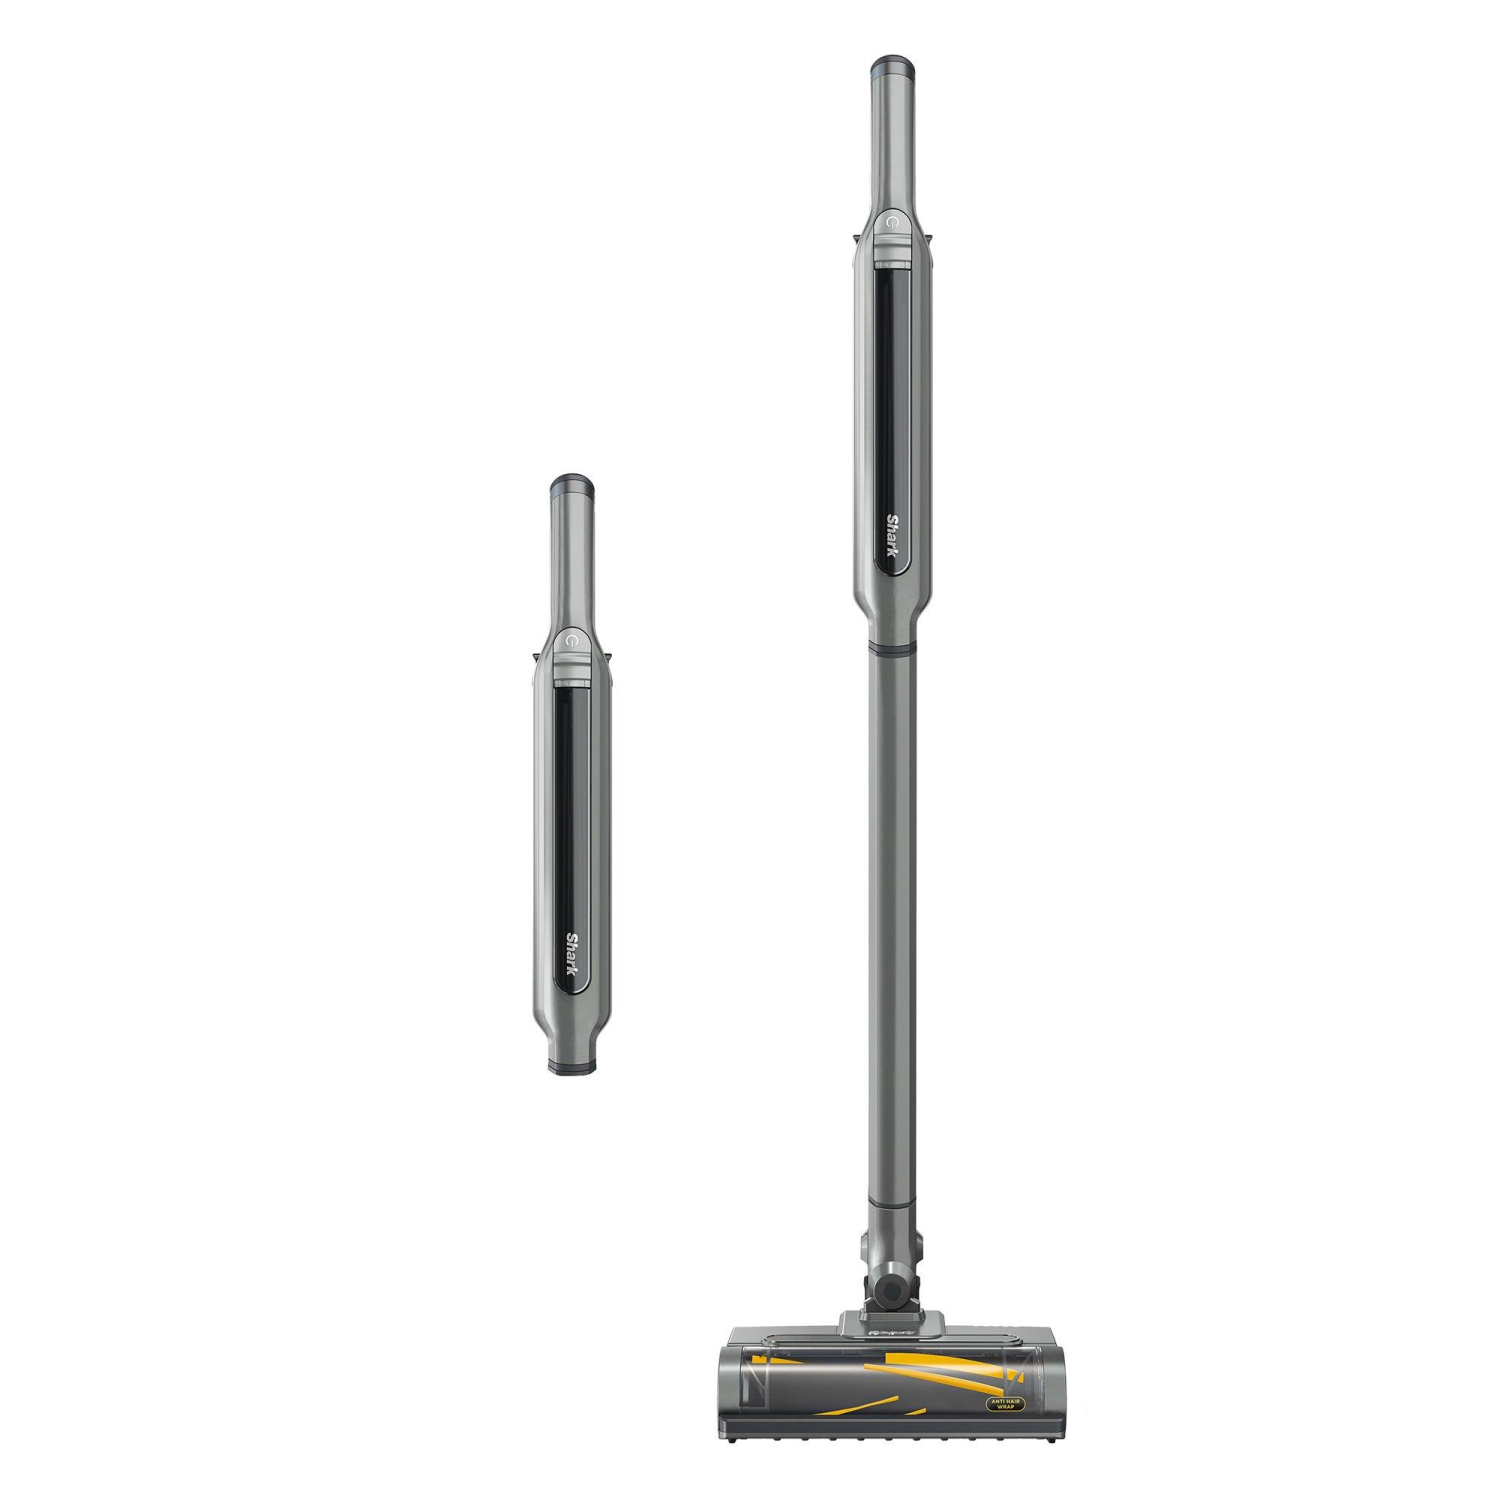 Shark WV361UK Cordless Vacuum Cleaner with Anti Hair Wrap Technology - Run Time 16 Mintues - Steel Grey - 8